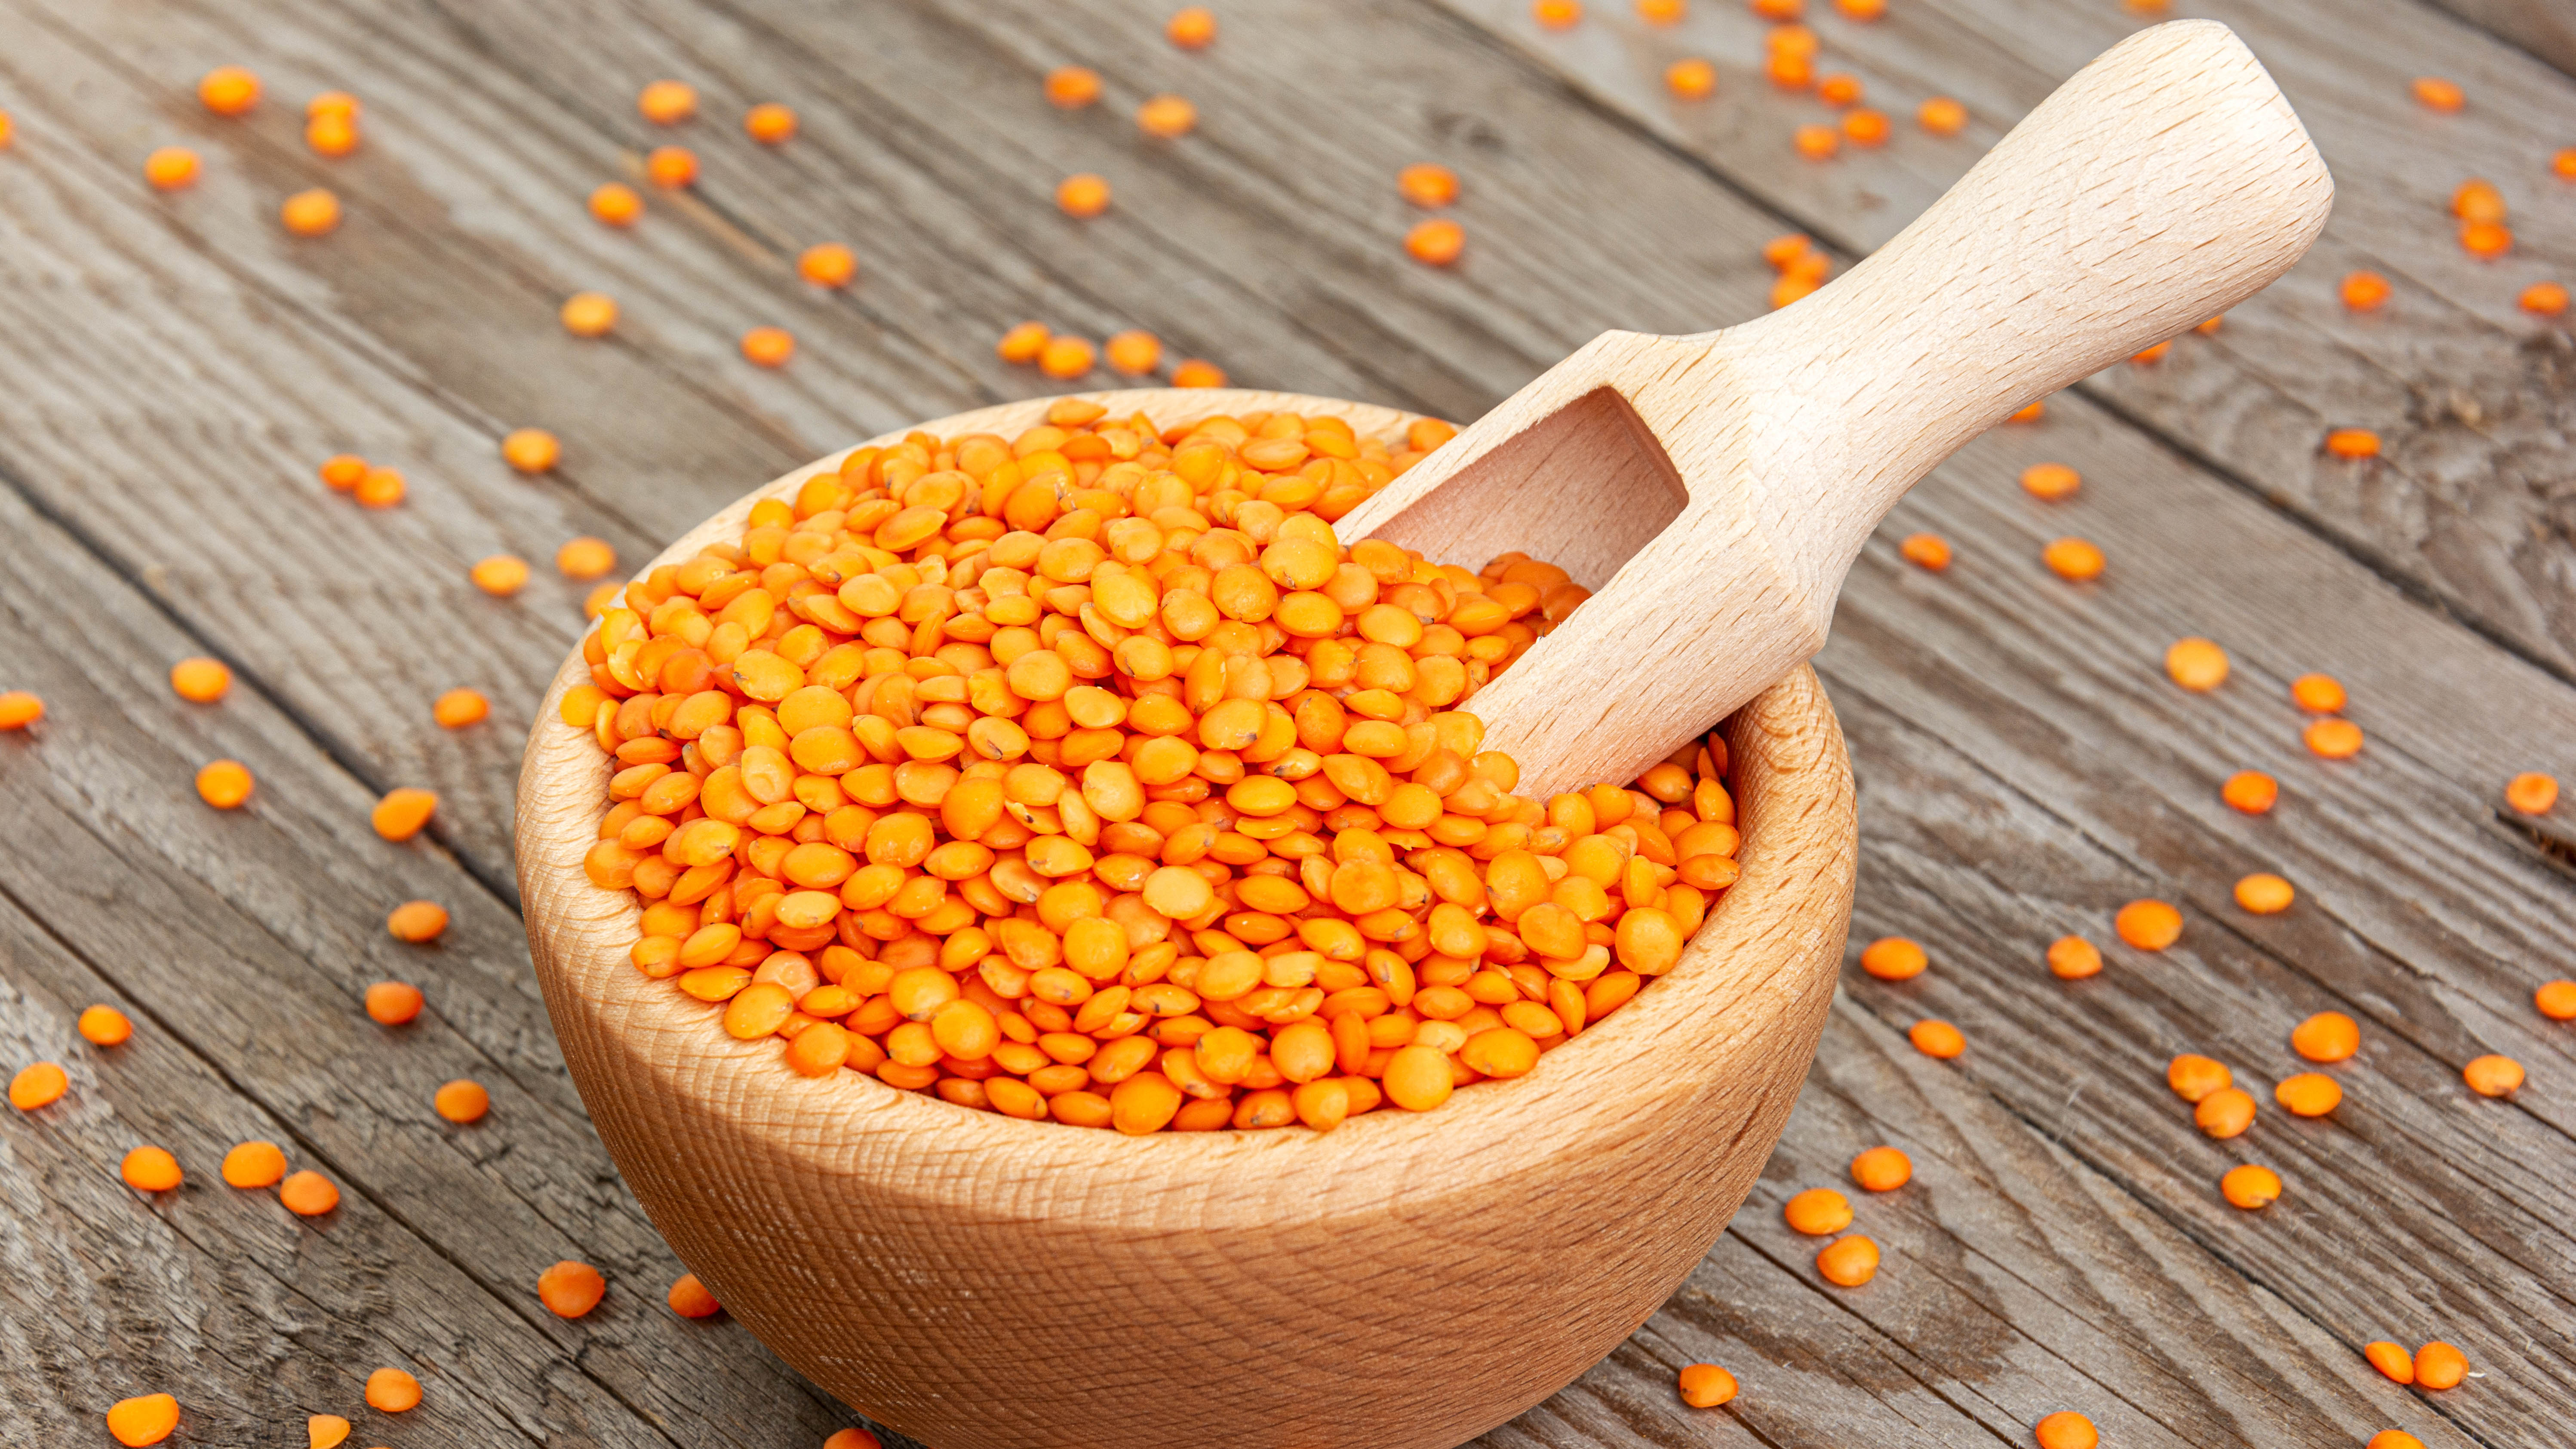 Red lentils in a wooden bowl